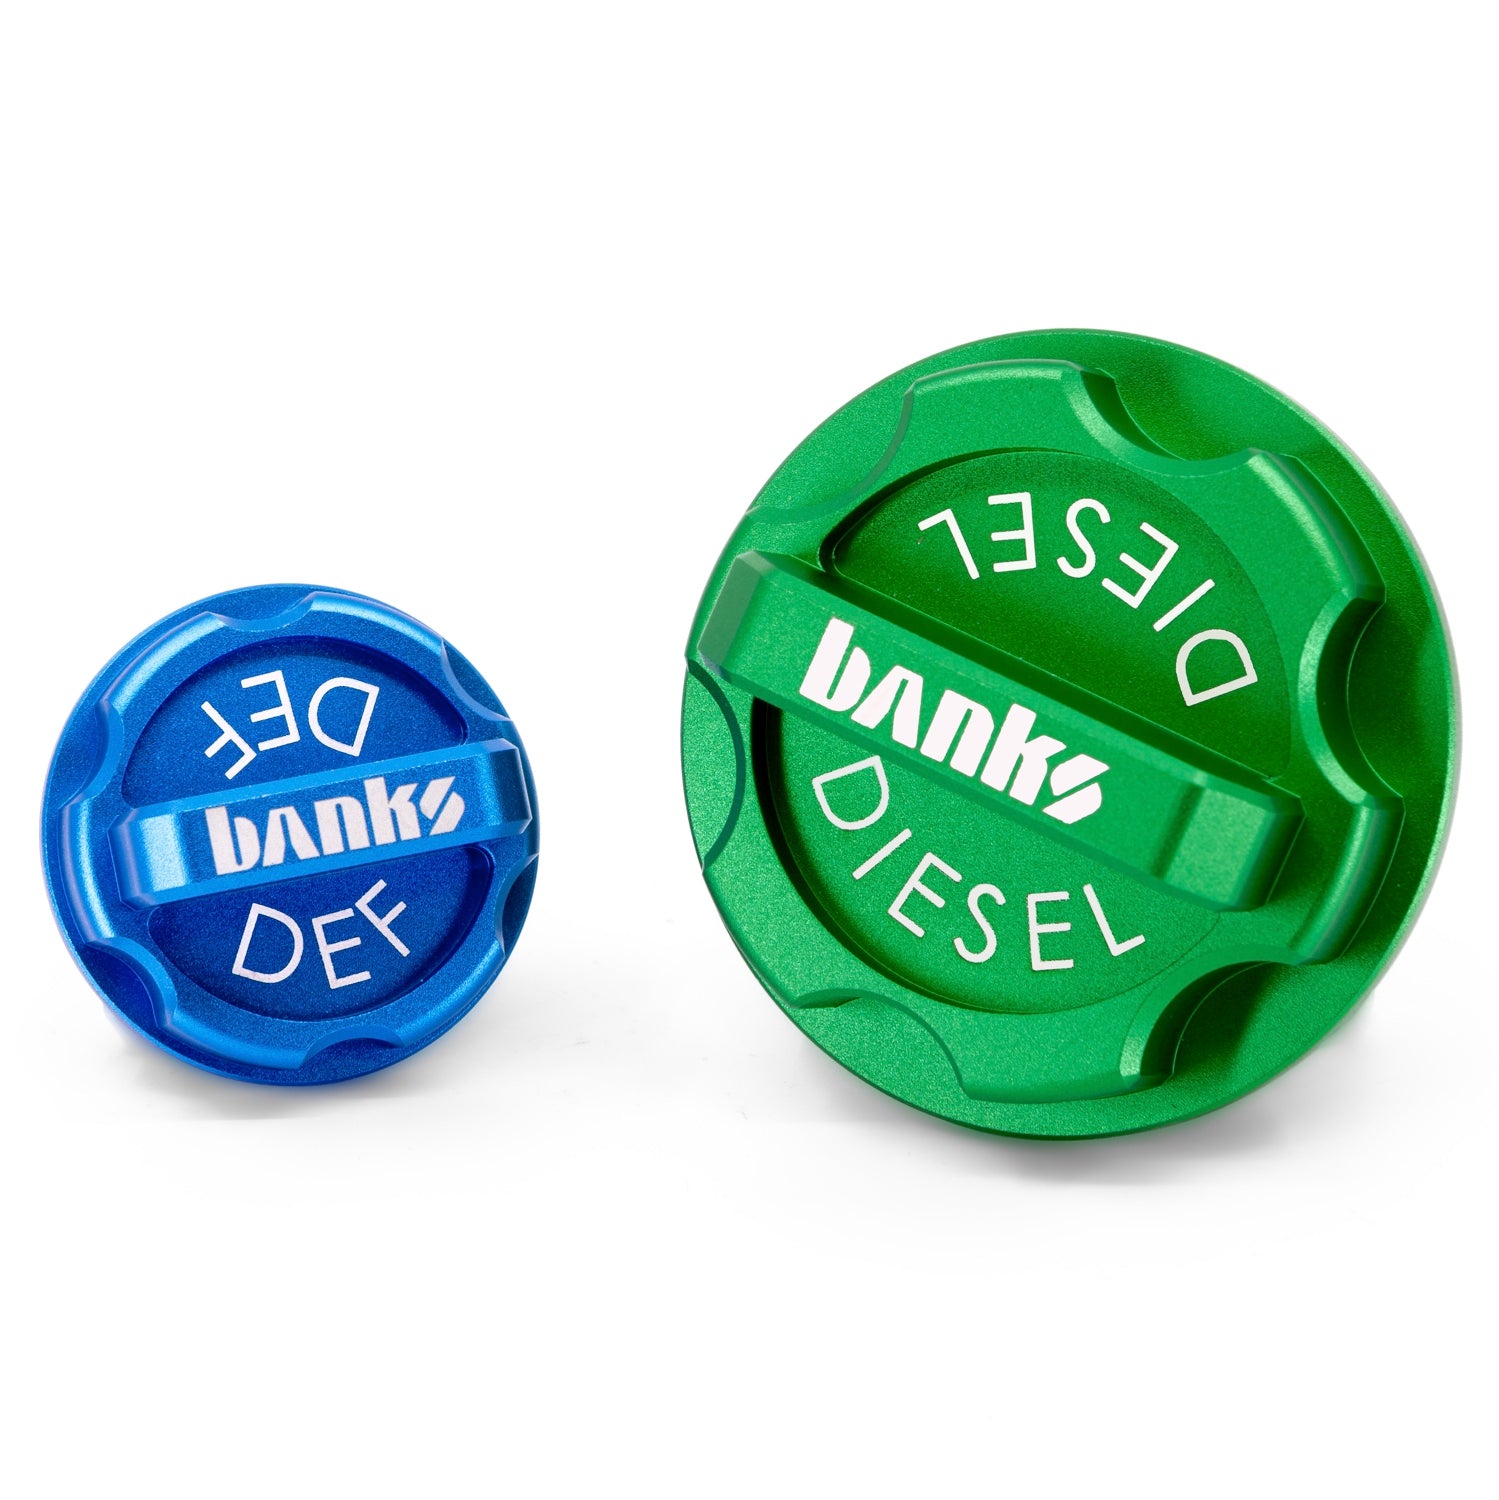 Banks Revolver DEF and Diesel Fill Caps